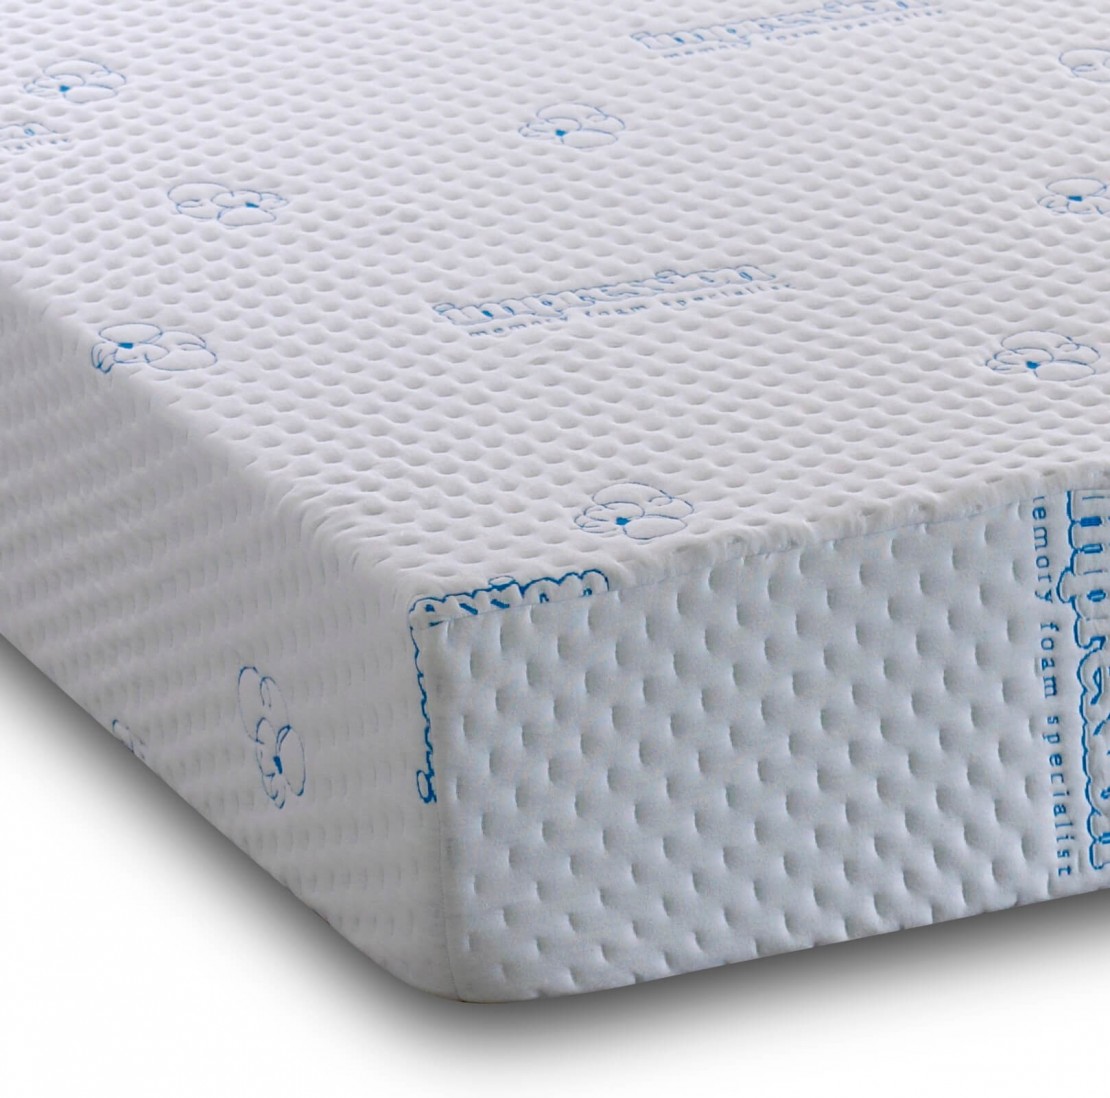 /_images/product-photos/visco-therapy-visco-3000-hd-memory-foam-firm-mattress-a.jpg